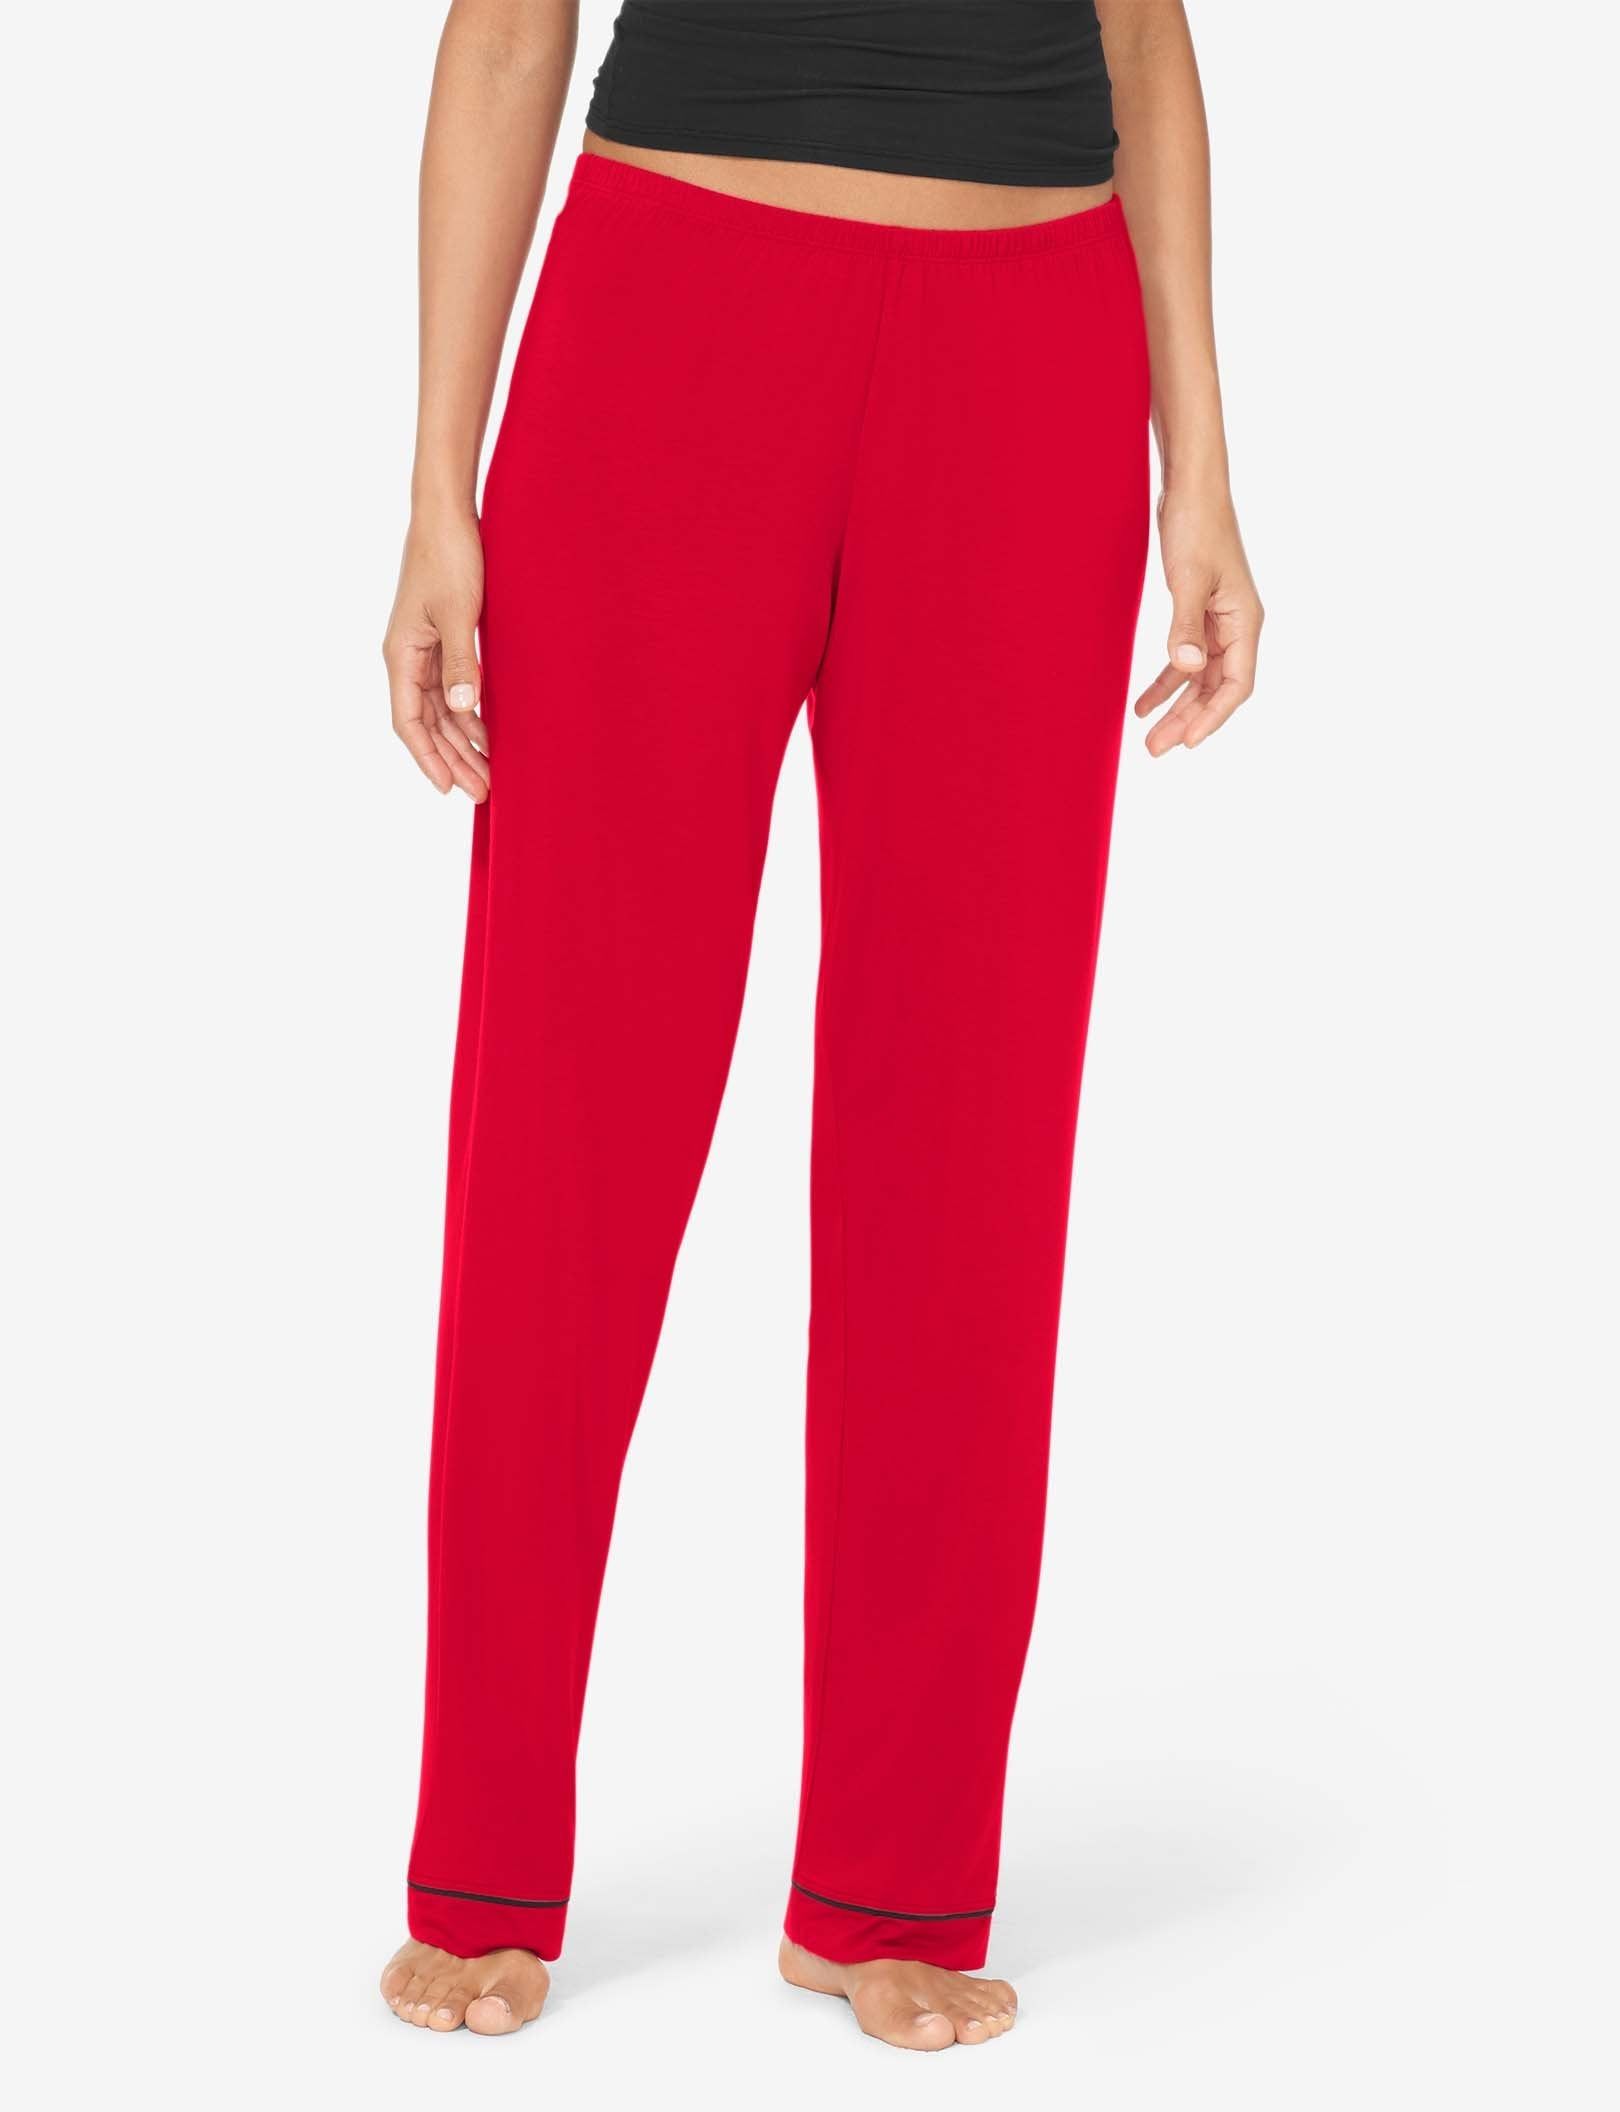 Women's Downtime Pajama Pant | Tommy John